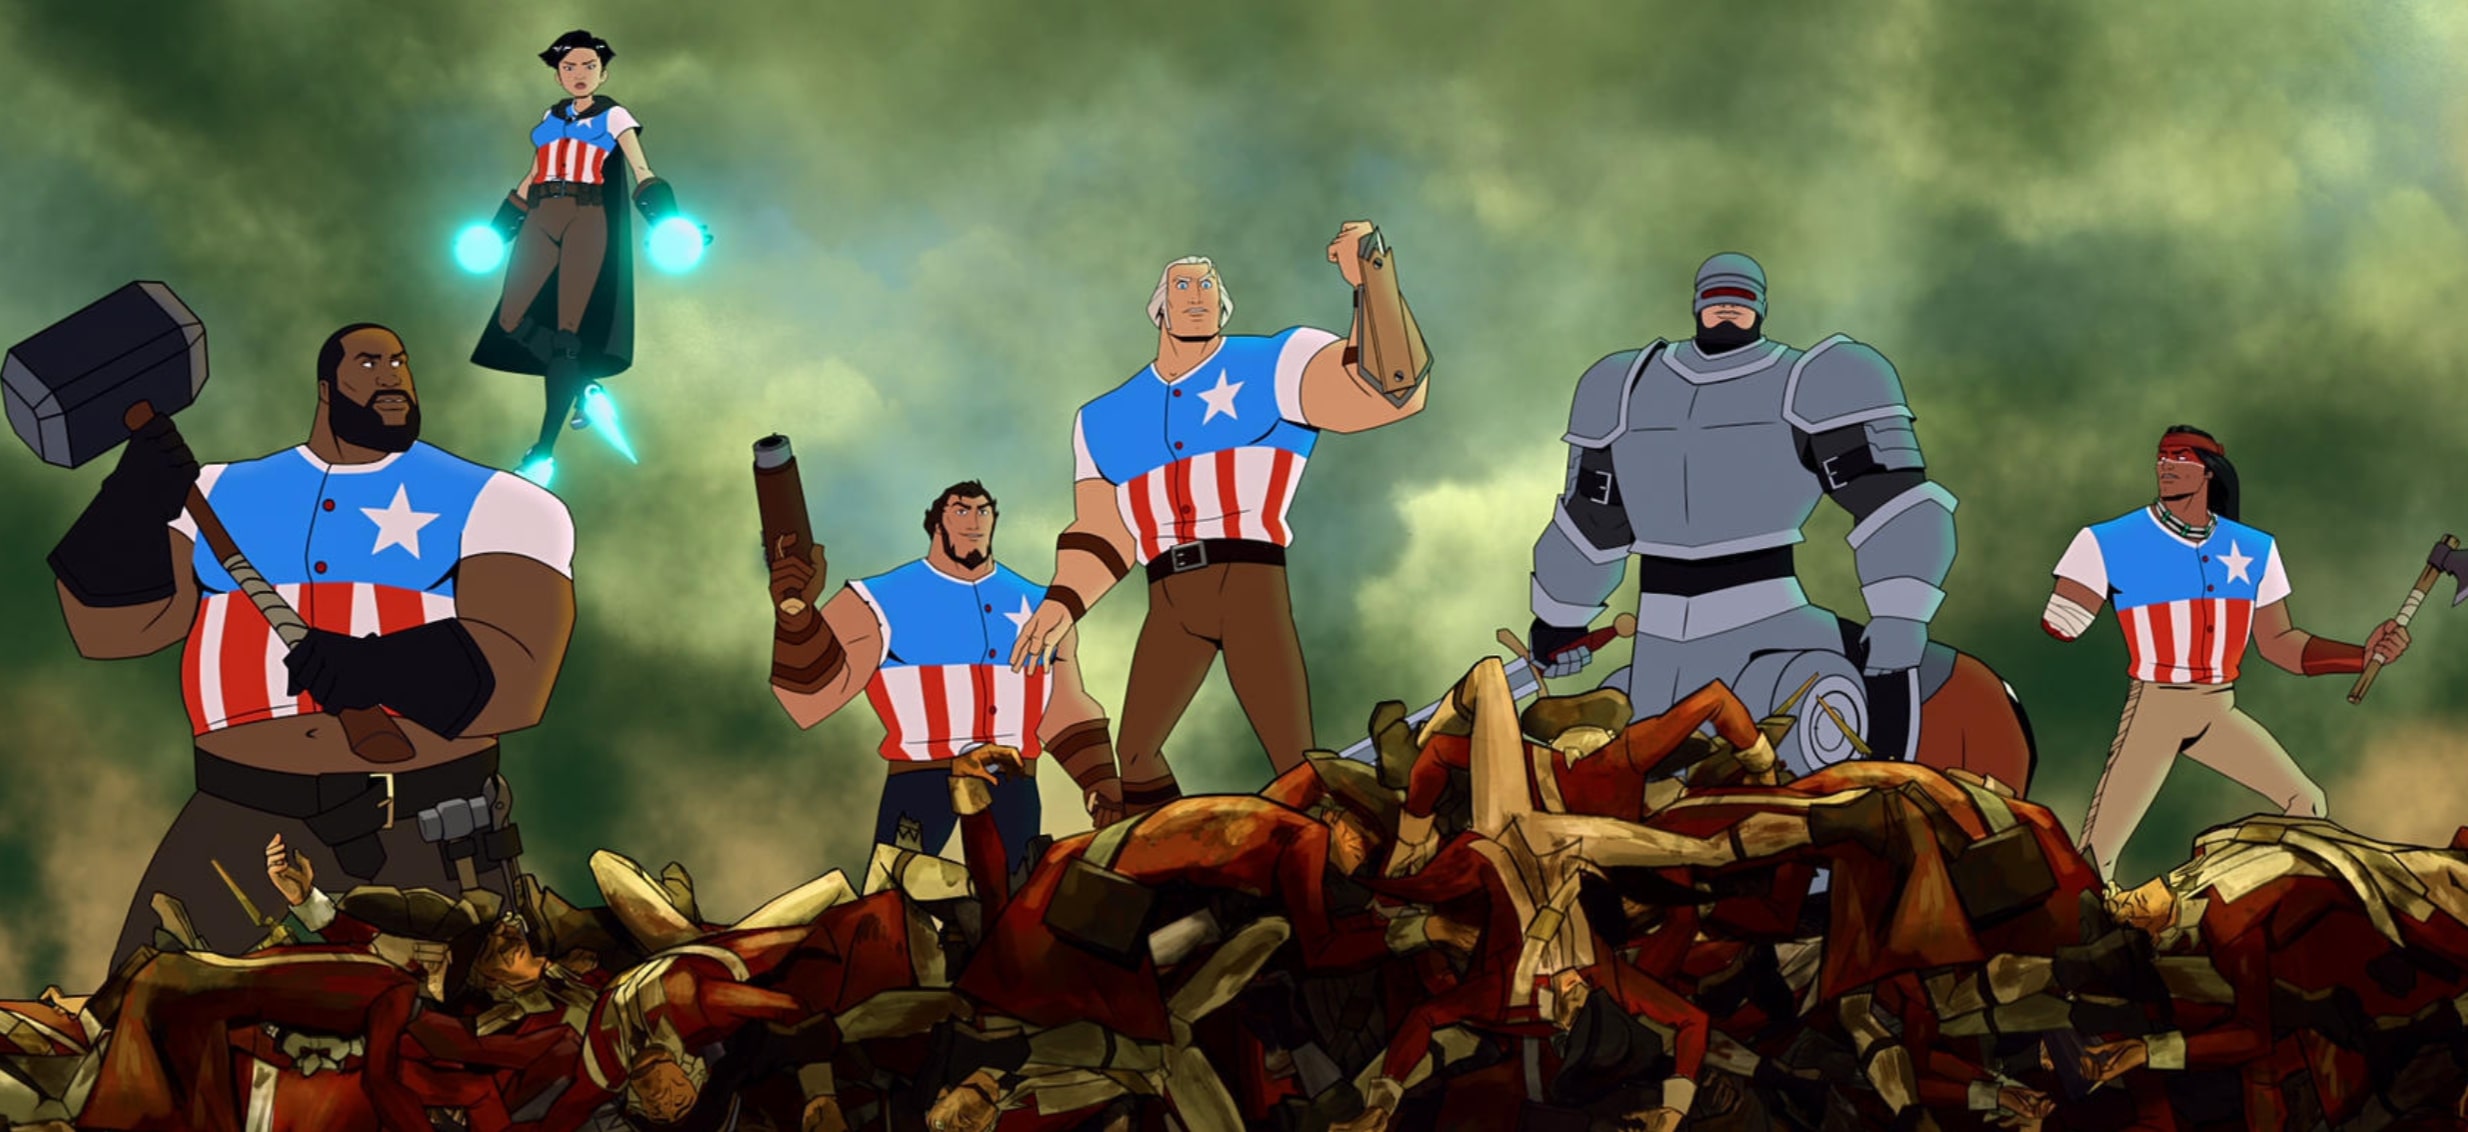 The first R-rated animated Netflix Netflix film skewers America’s founding